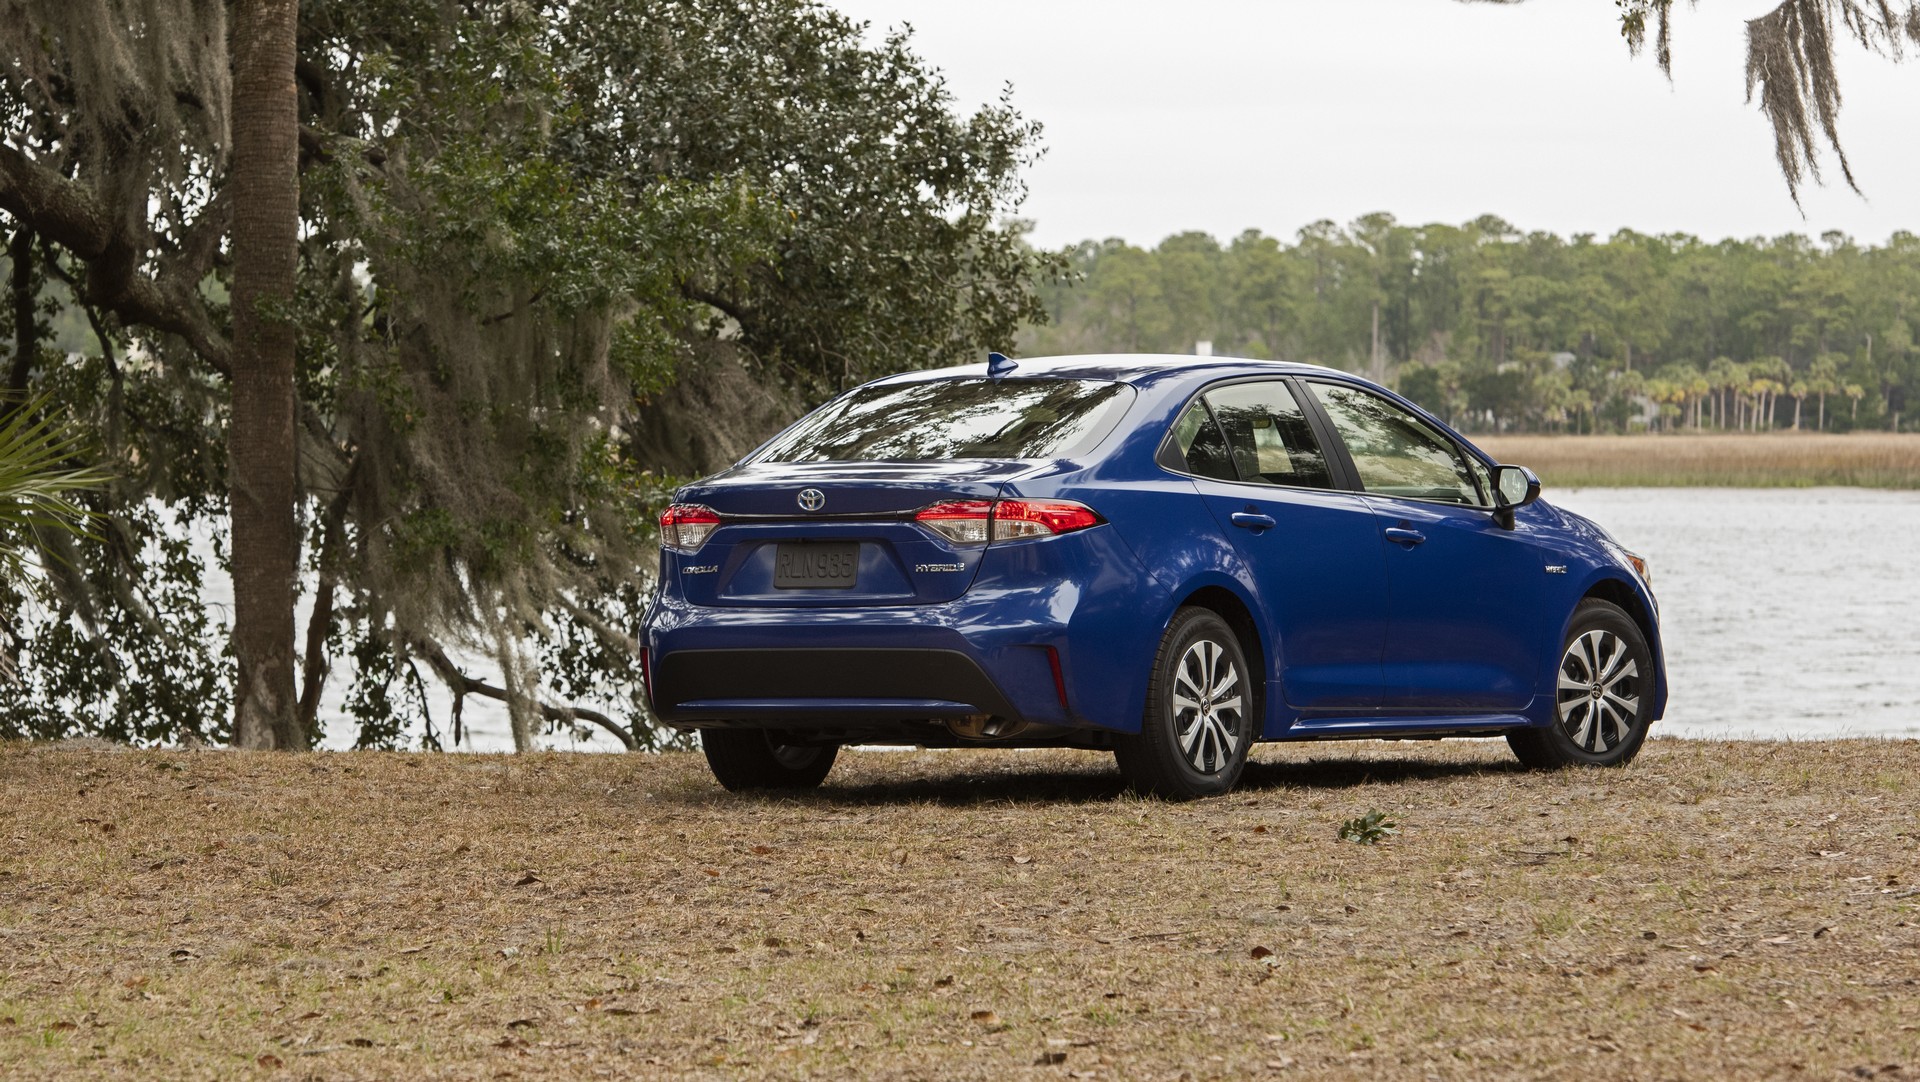 2020 Toyota Corolla Starts At $19,500, See It In 200+ Photos | Carscoops